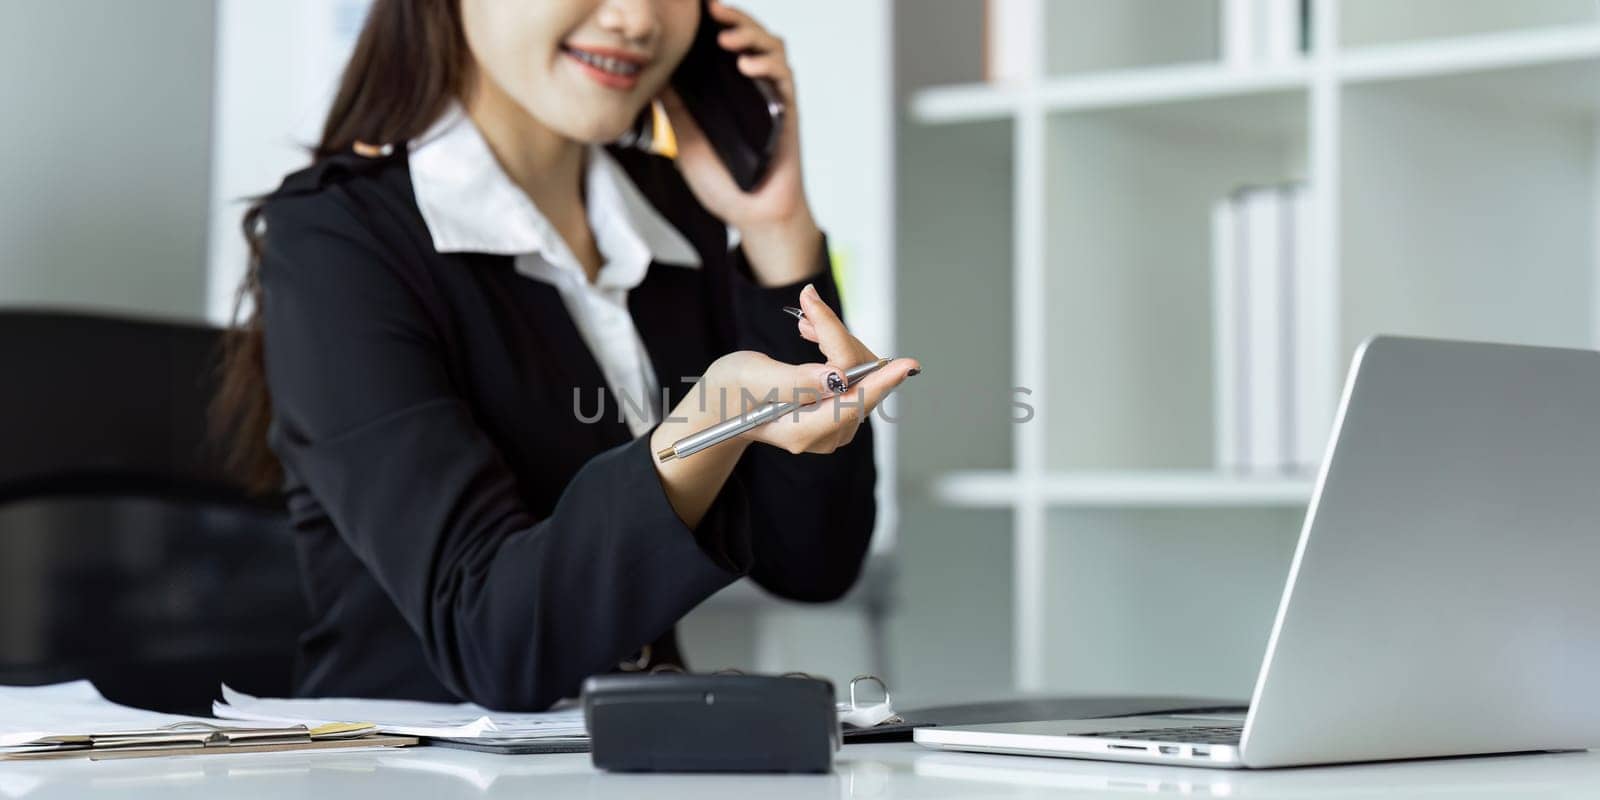 Businesswoman on the phone and using laptop at office. Businesswoman professional talking on mobile phone.